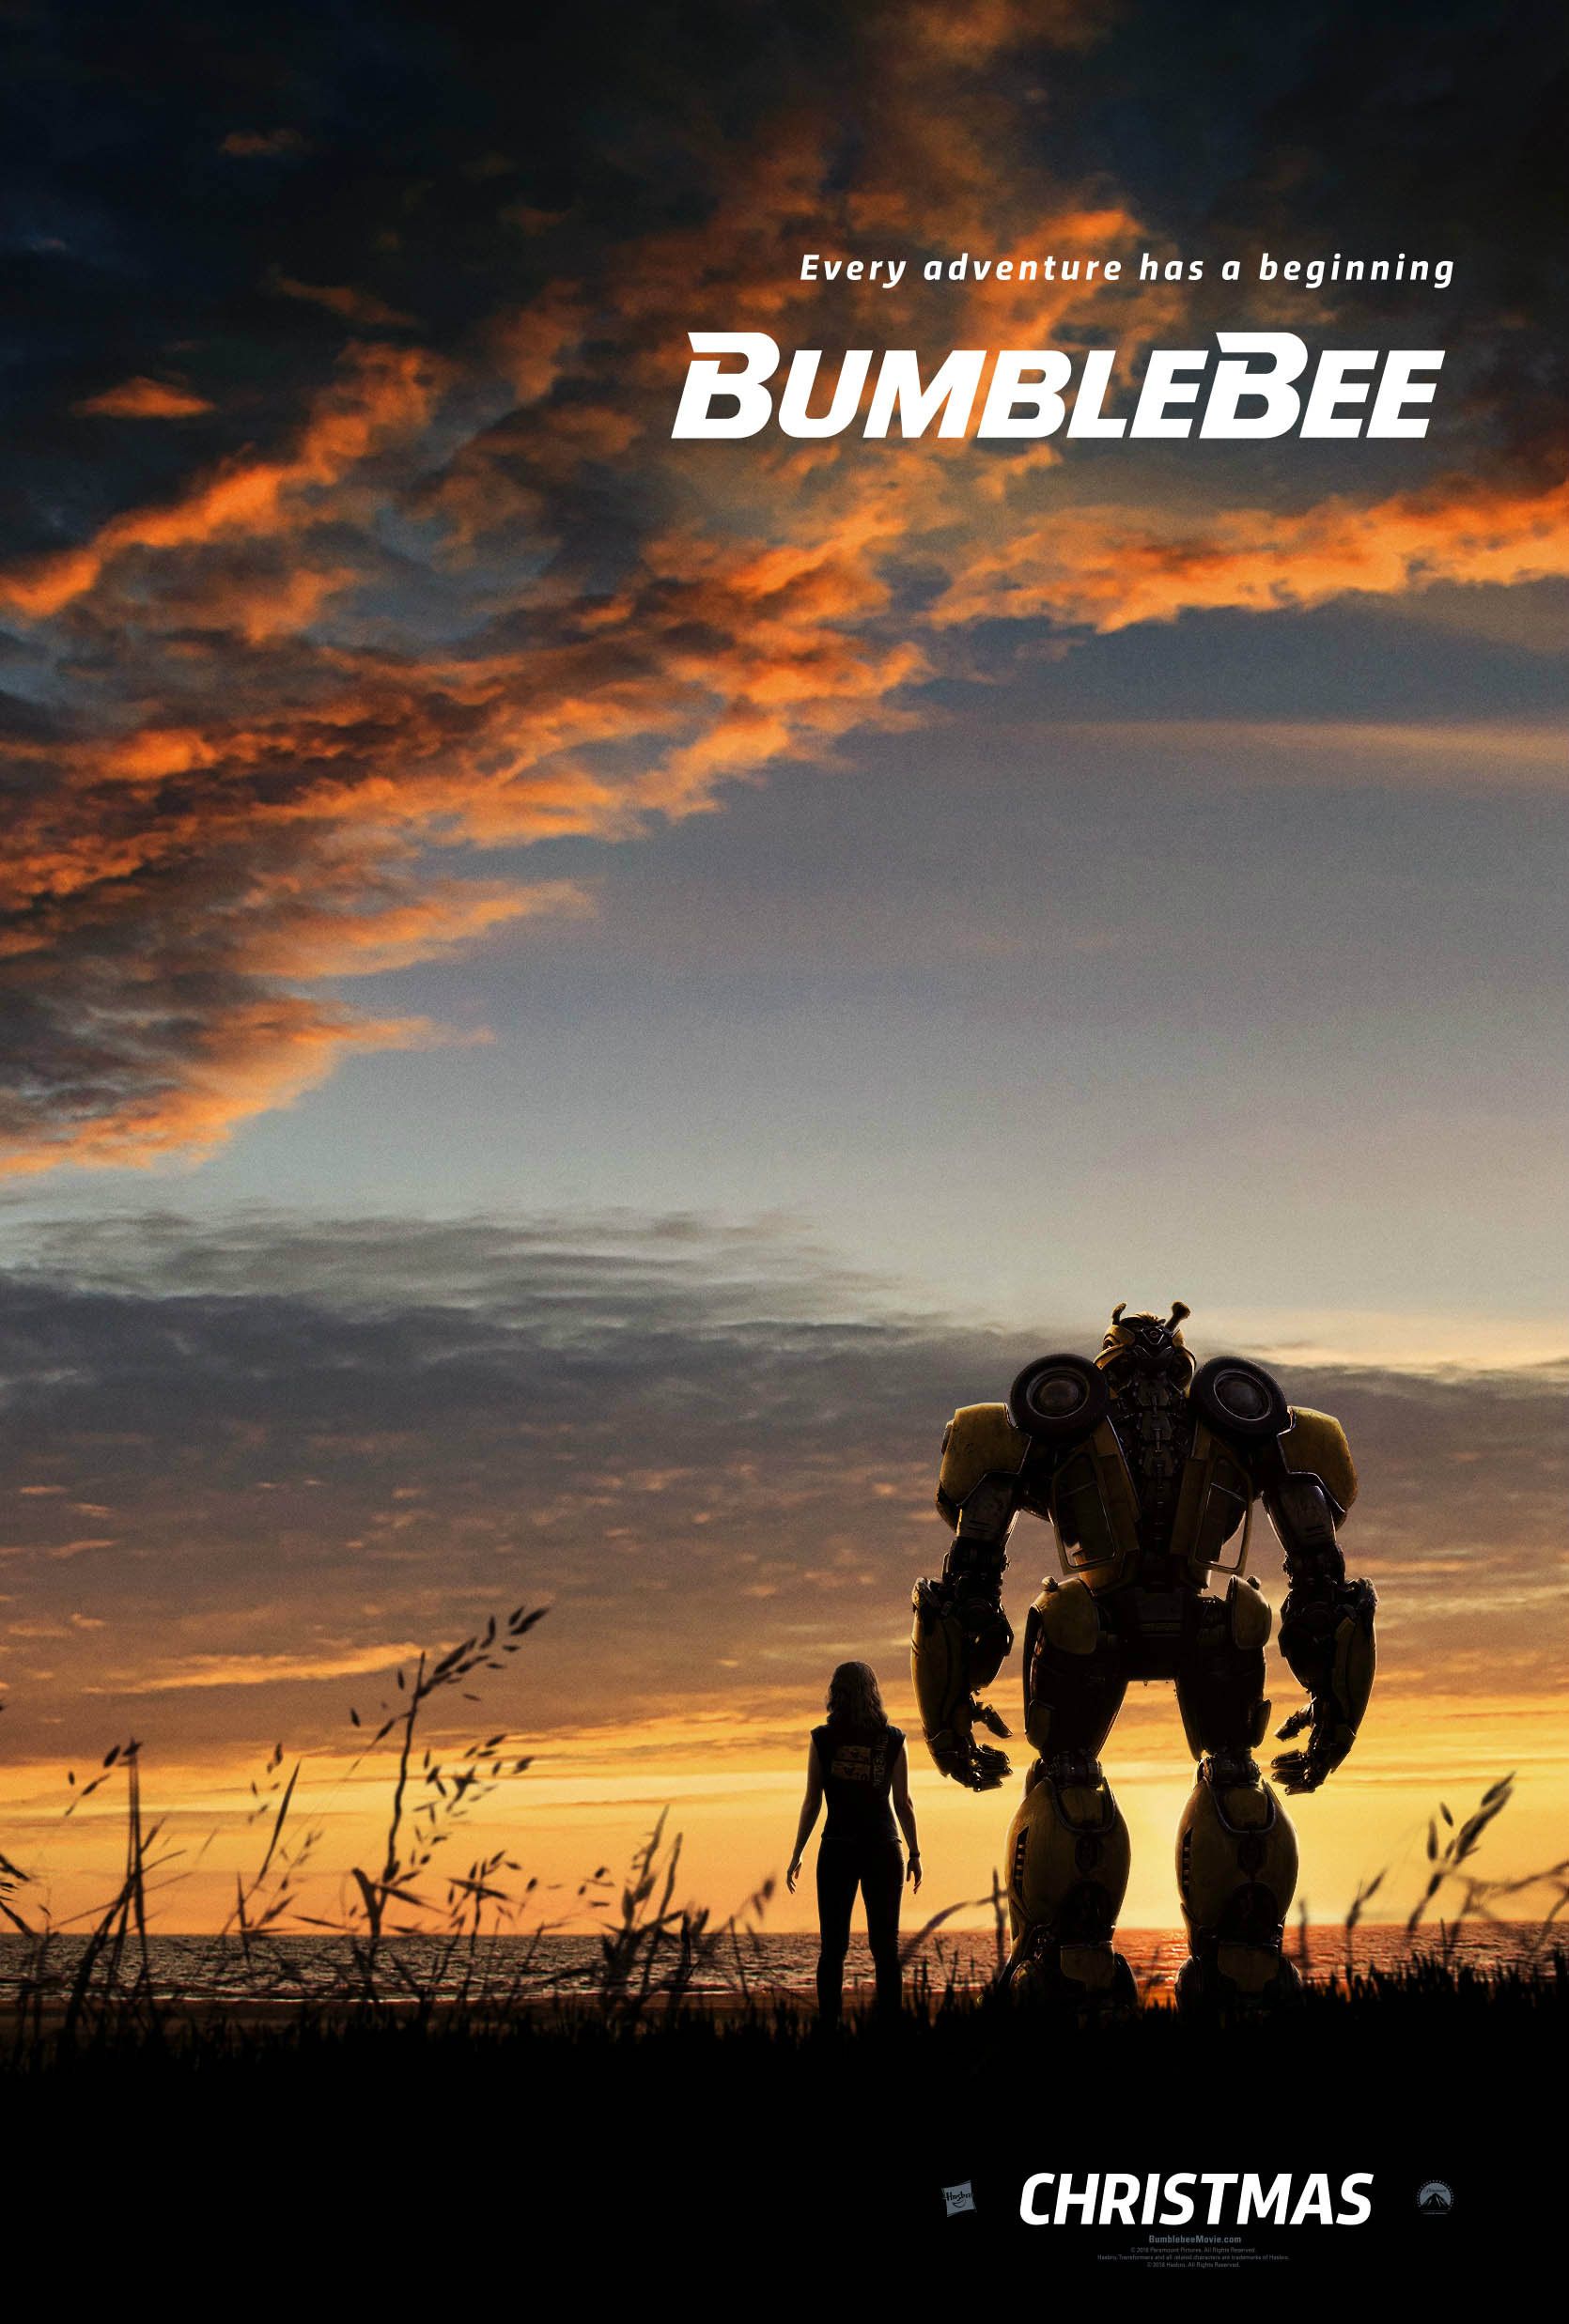 Bumblebee Teaser Trailer: Transformers Goes Back to the ’80s